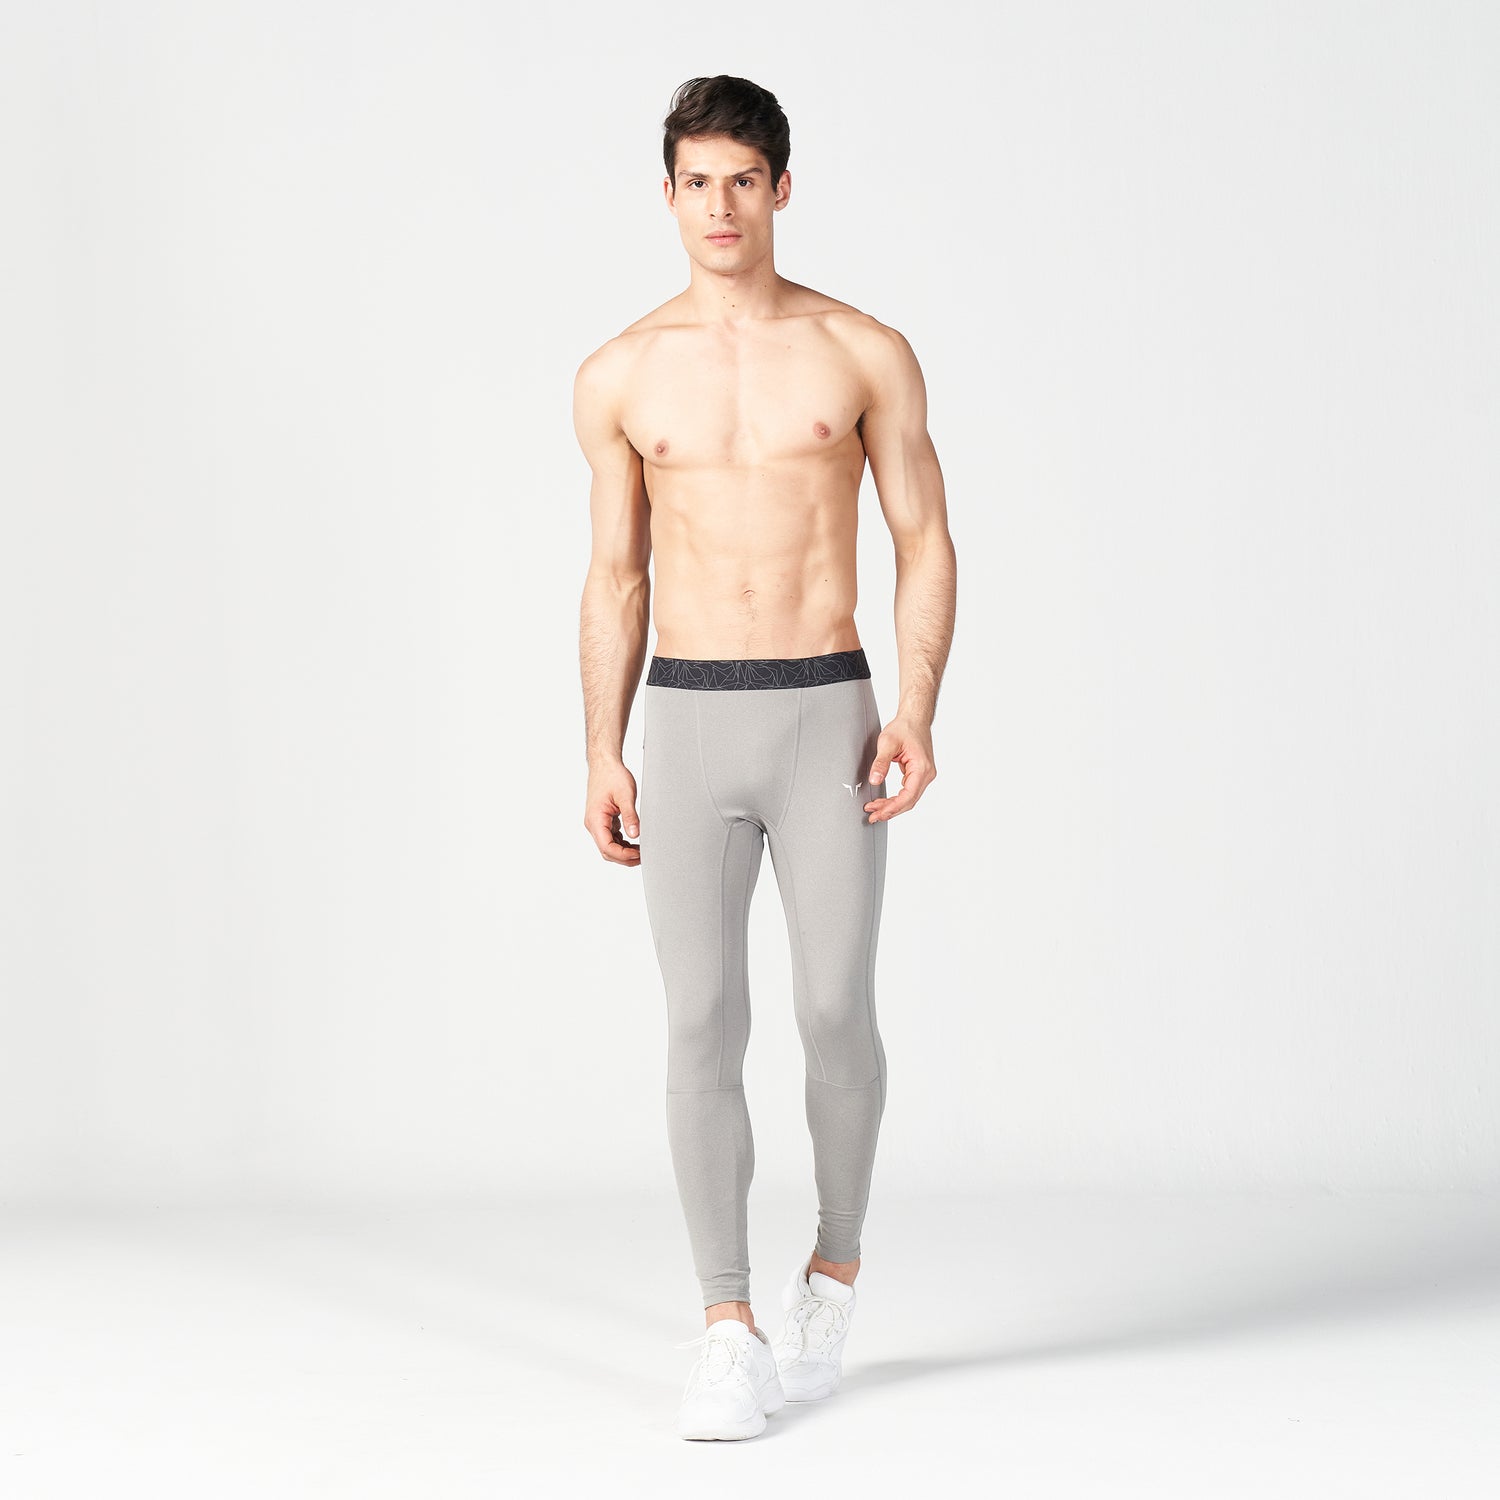 squatwolf-gym-wear-core-protech-tights-grey-marl-workout tights-for-men